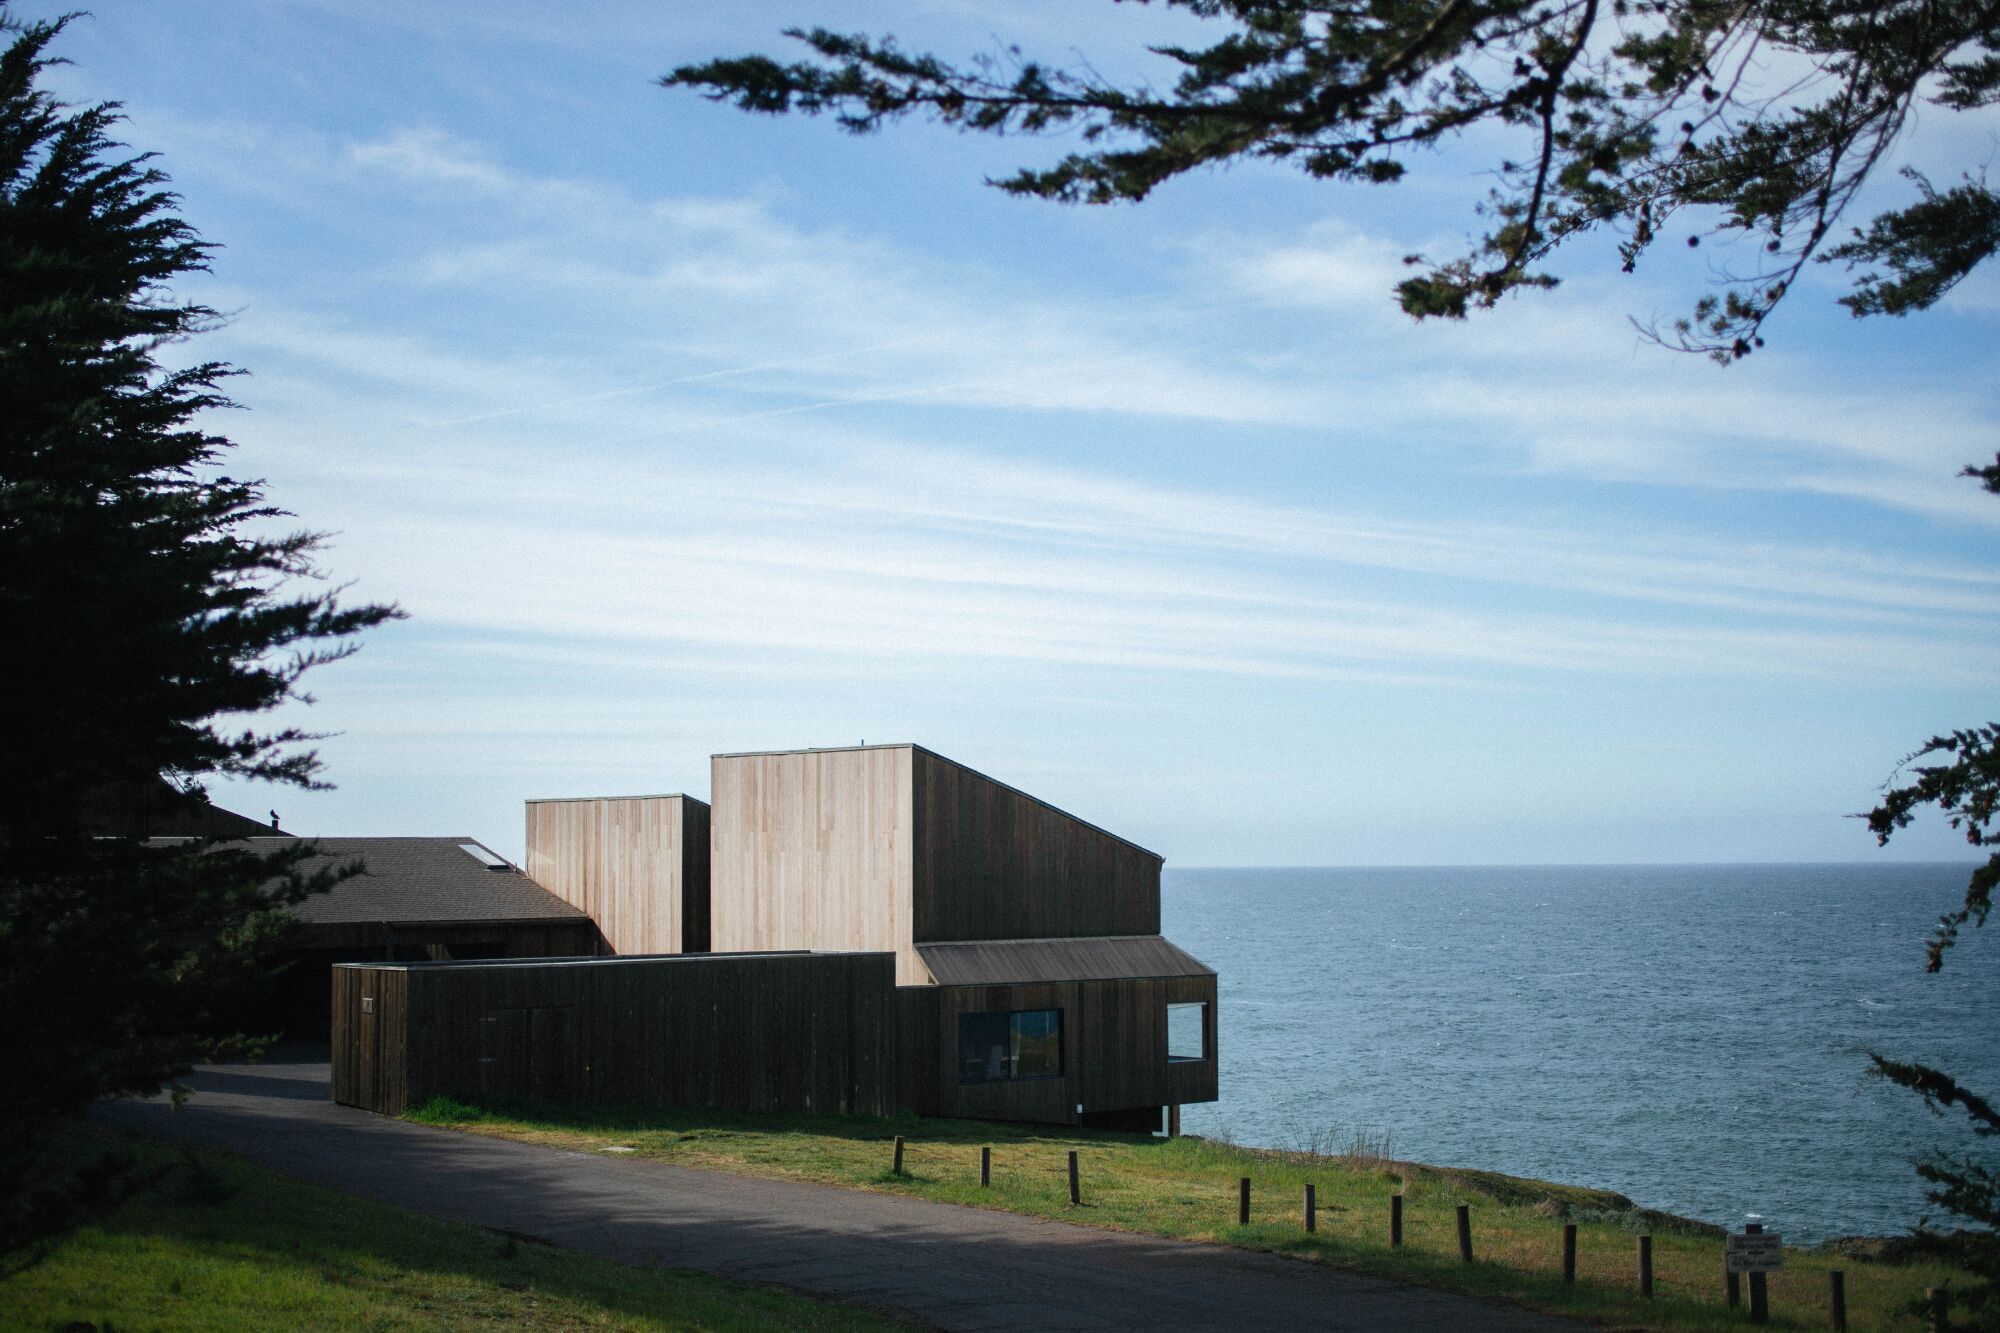 A boxy wooden building sits on a bluff overlooking the ocean.